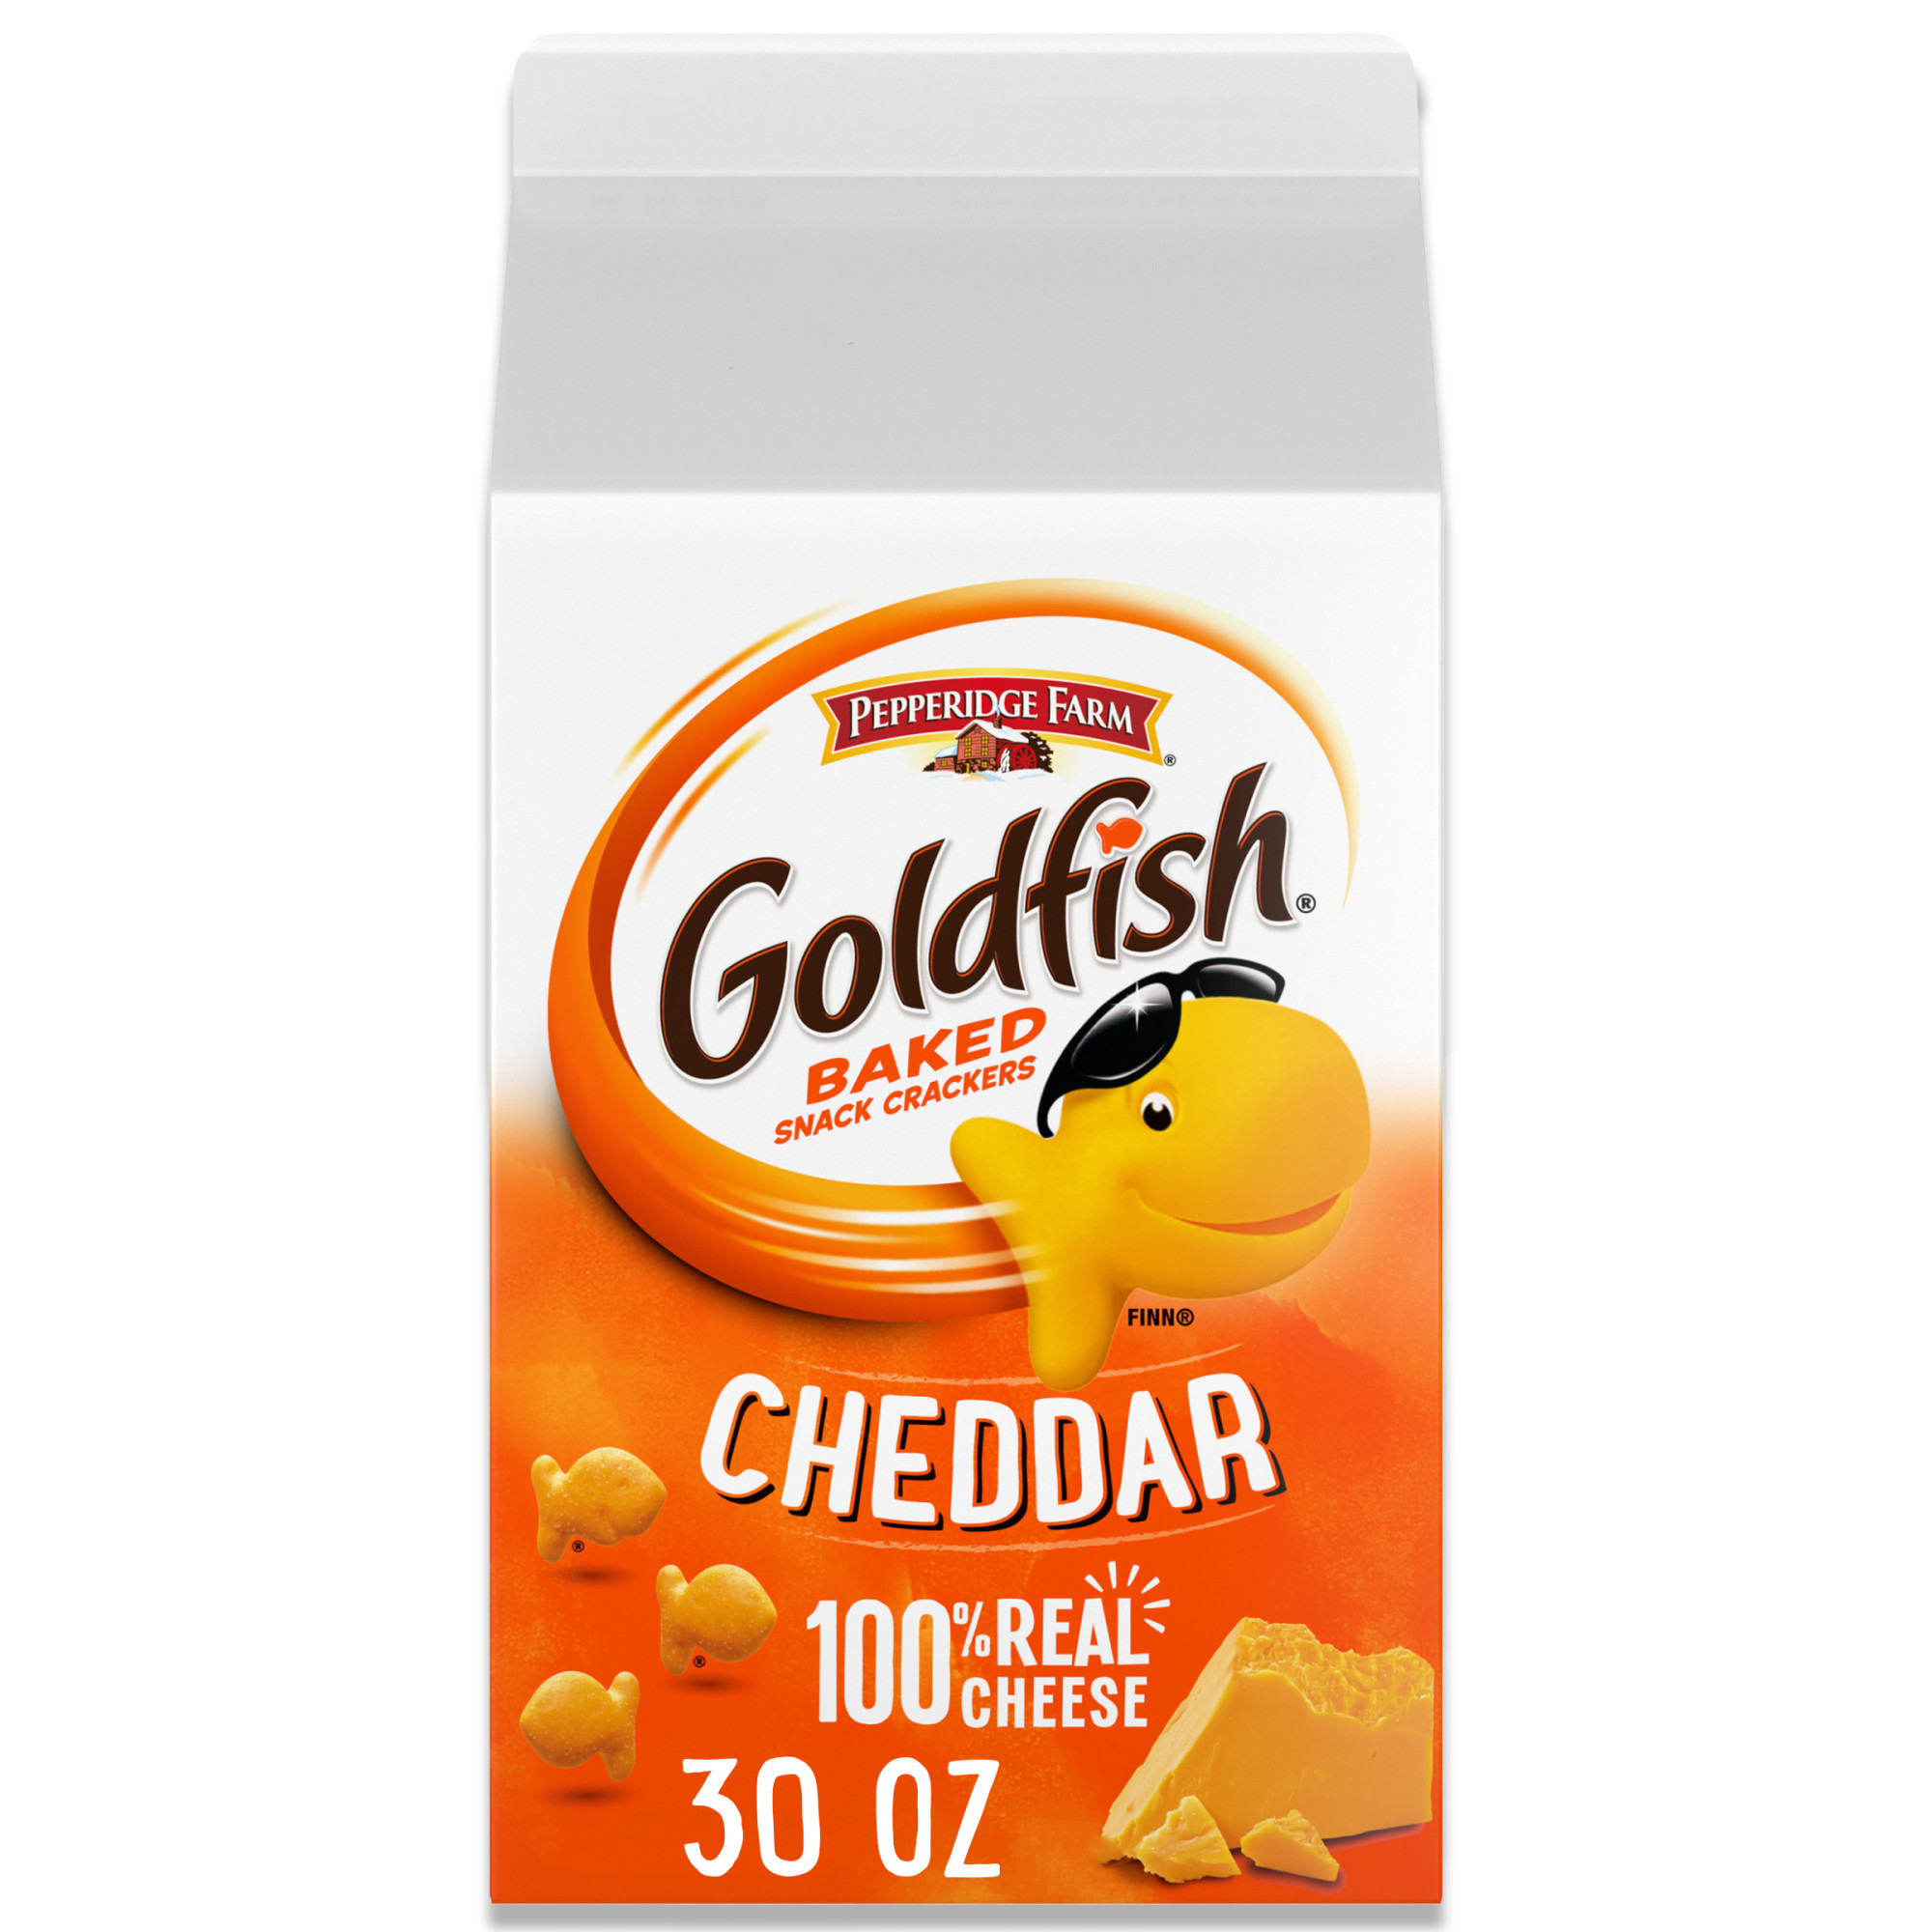 Goldfish Cheddar Cheese Crackers, Baked Snack Crackers, 30 oz Carton - image 1 of 11